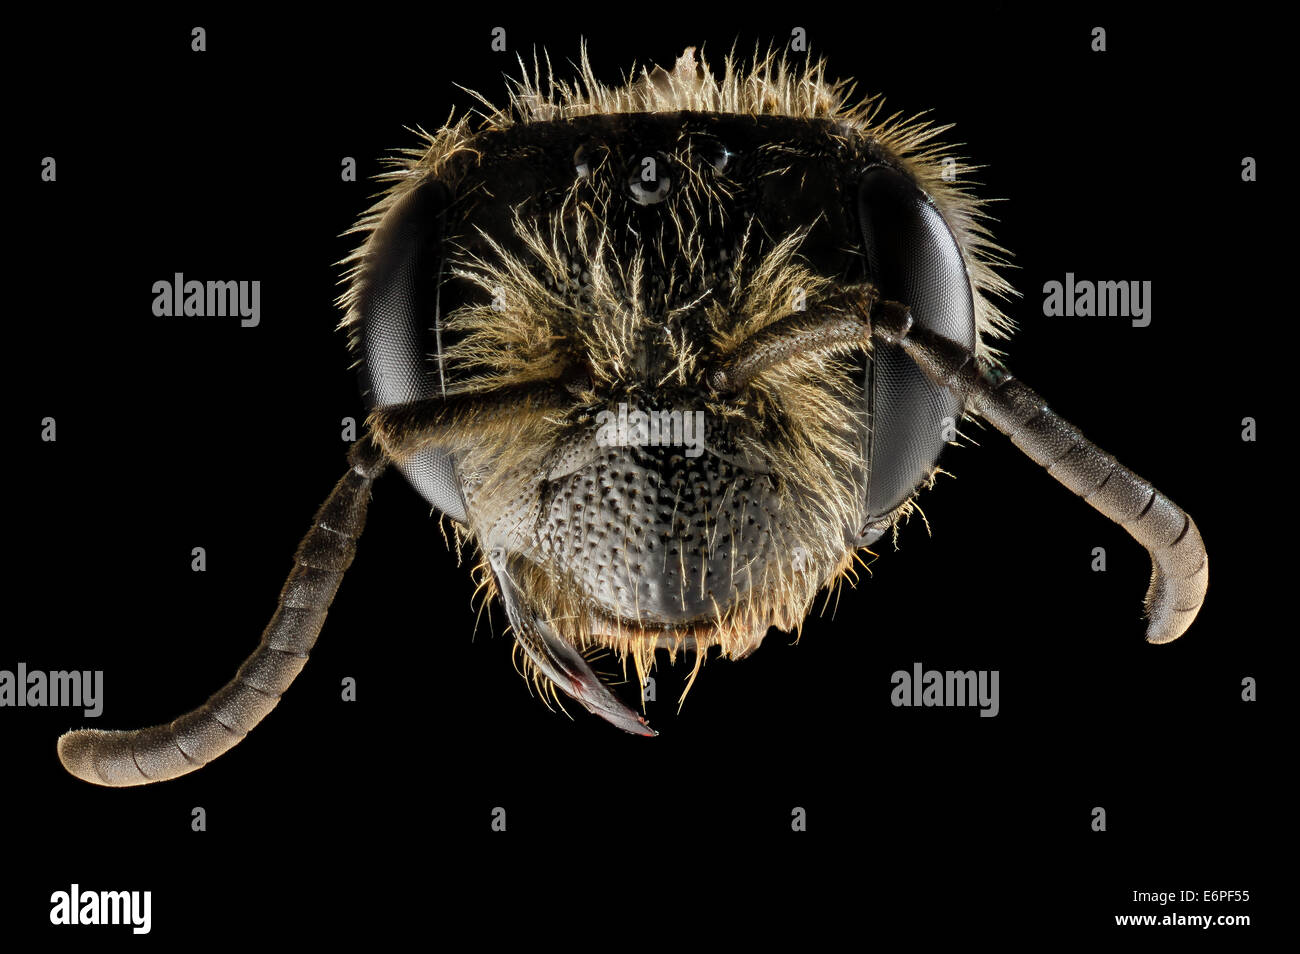 Andrena rugosa, f, face, upper marlboro, md 2014-04-21-182818 ZS PMax 13997039323 o This specimen was shot upside down and then  Stock Photo